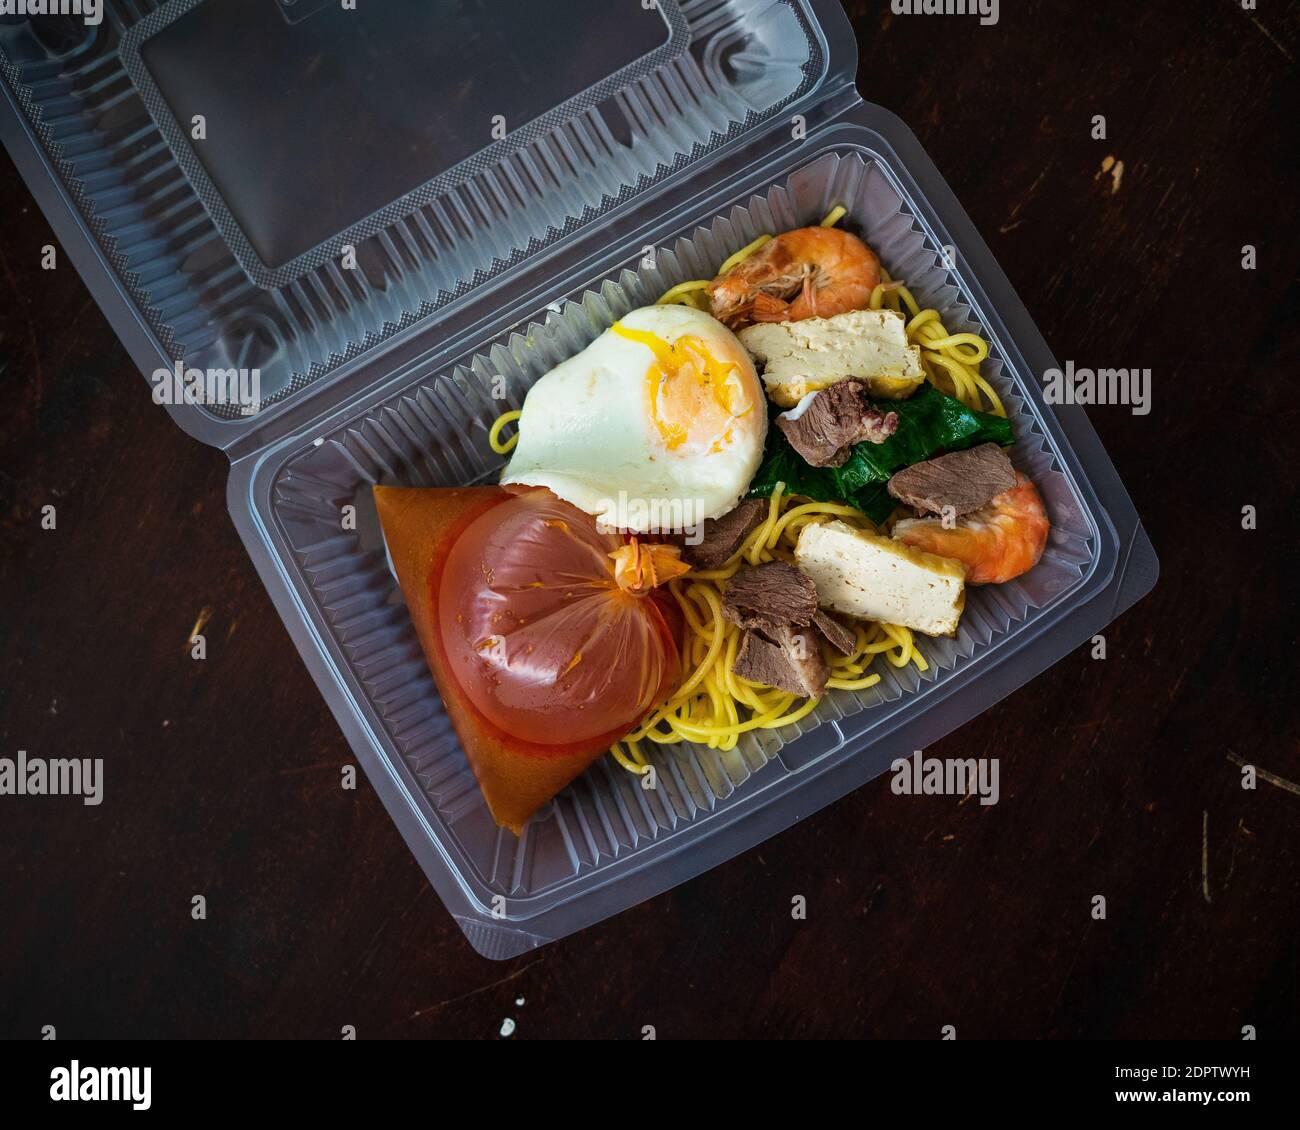 Mee Bandung Muar In A Take Out Box, A Malaysia Delicacy Noodle Originated  From Muar, Malaysia Stock Photo - Alamy